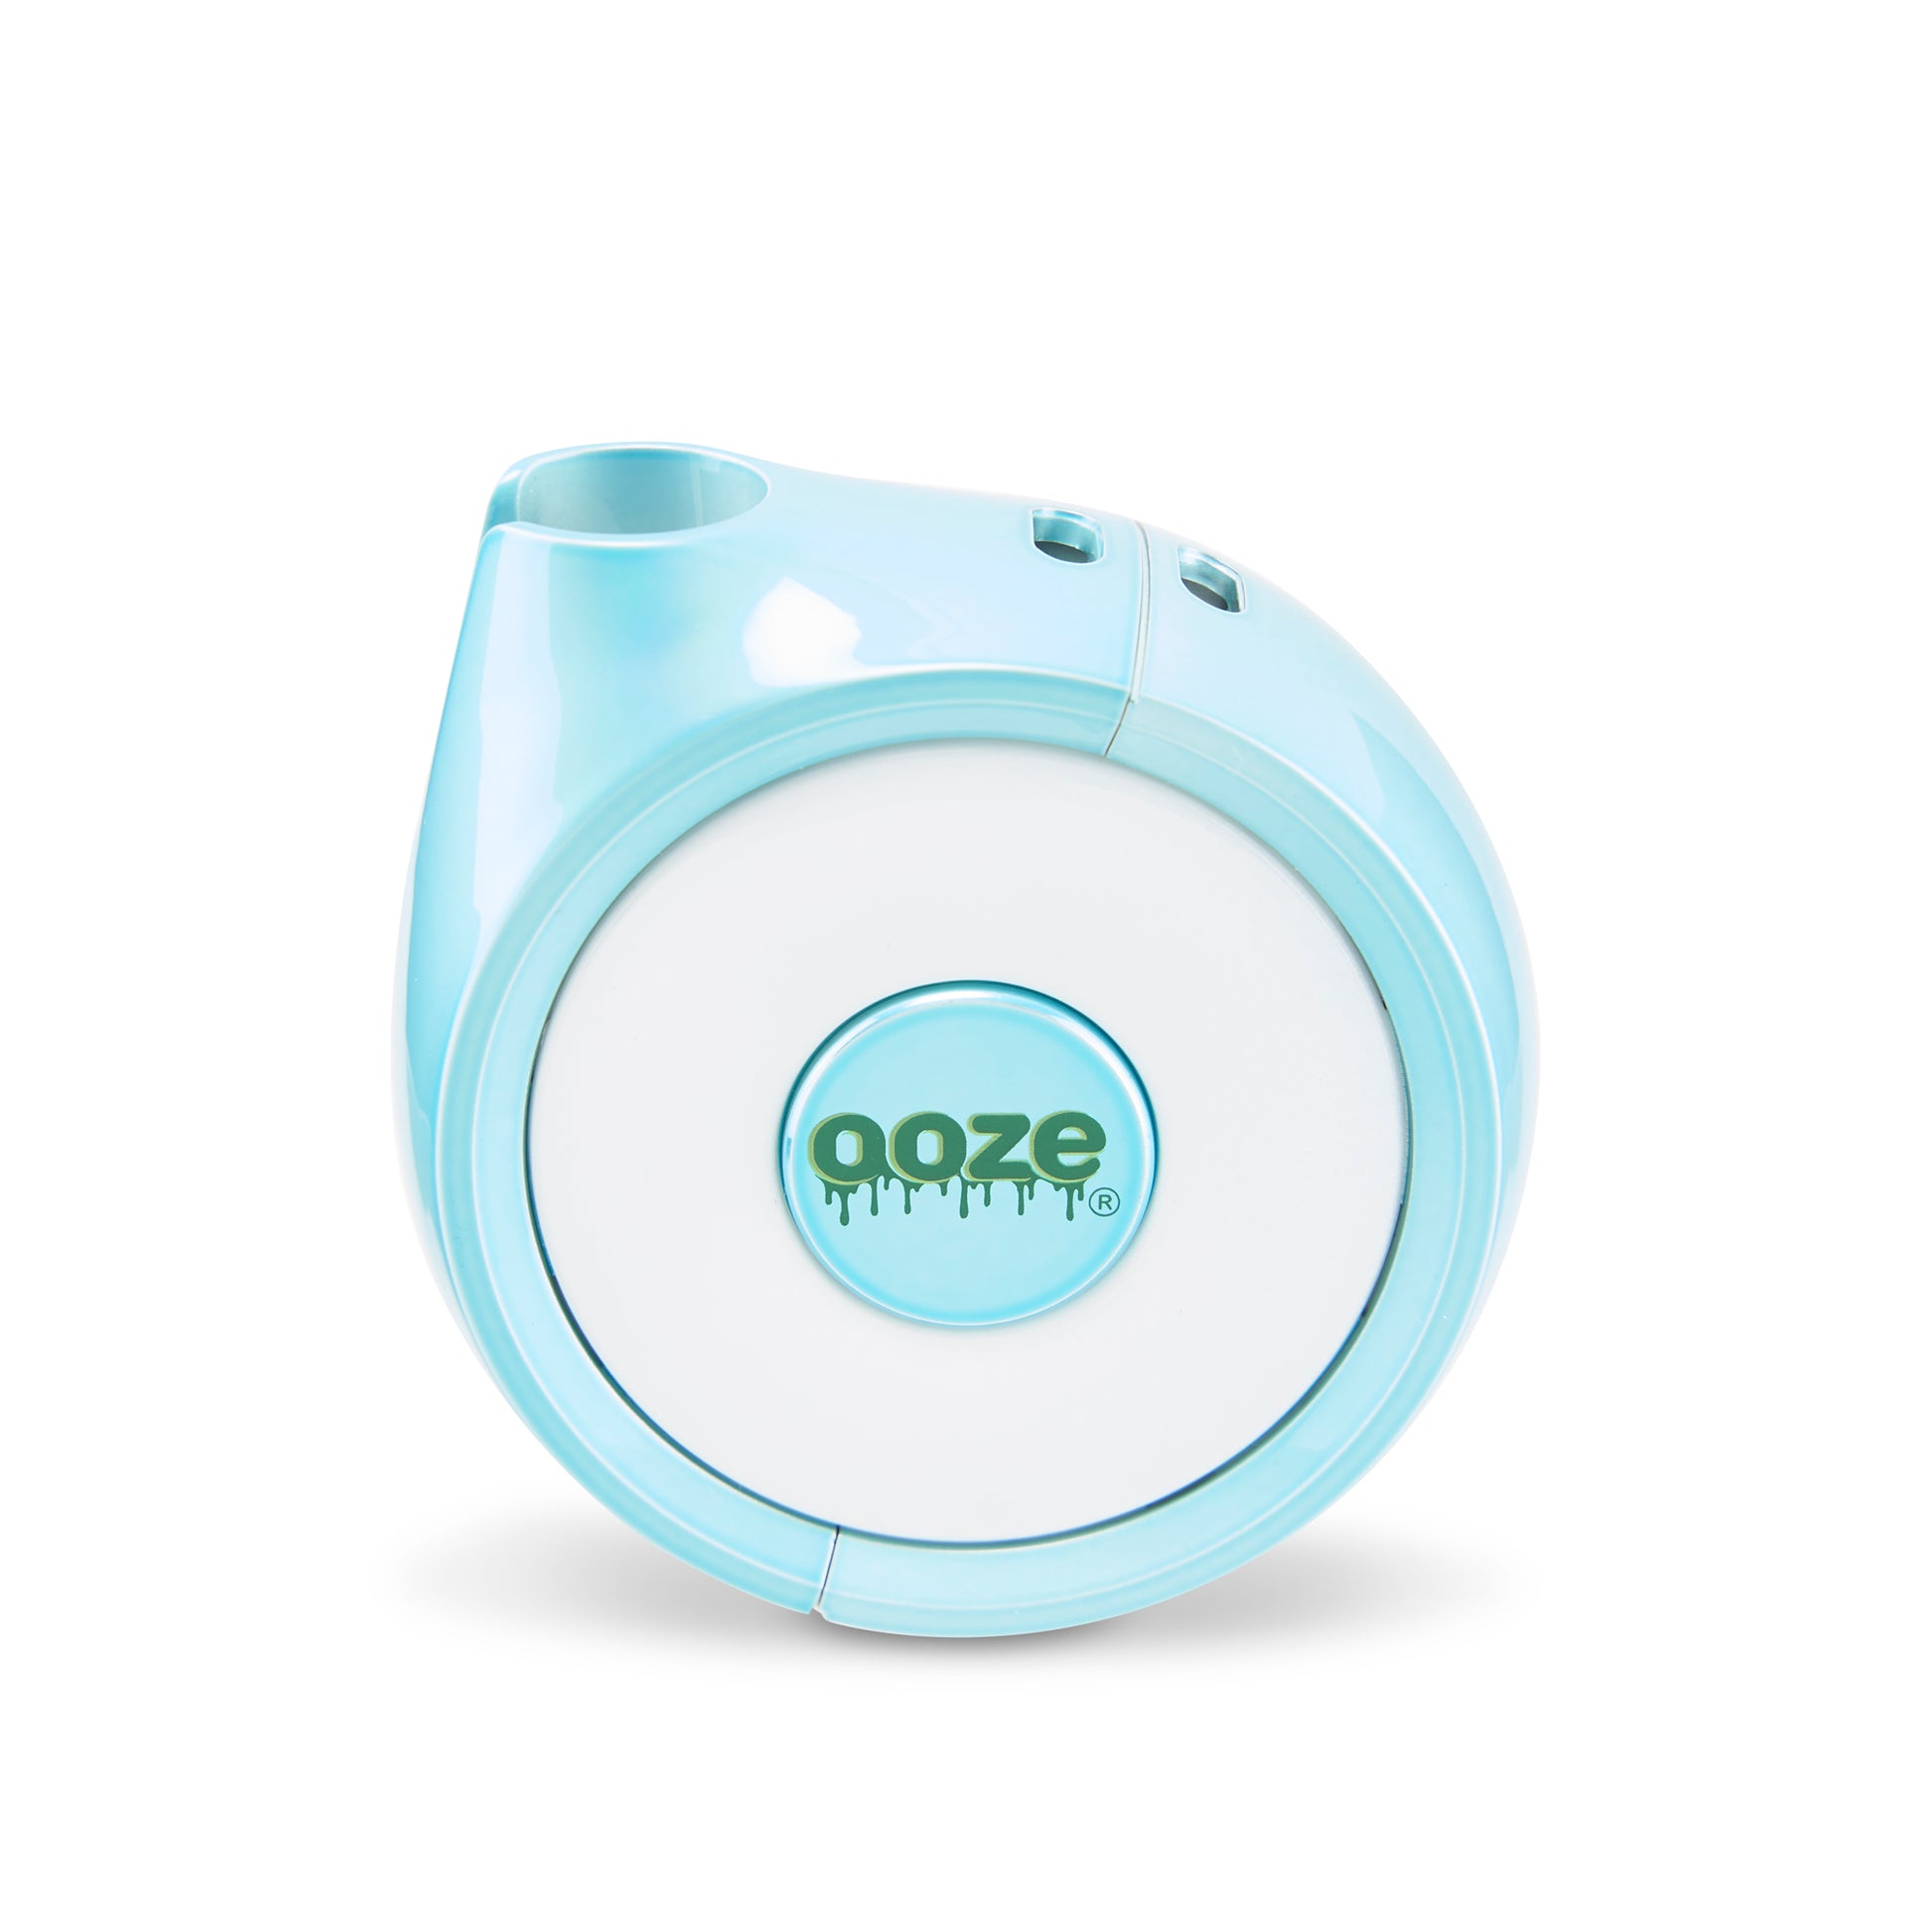 The Ooze Movez Speaker Vape in Arctic Blue is shown with the button facing the camera.